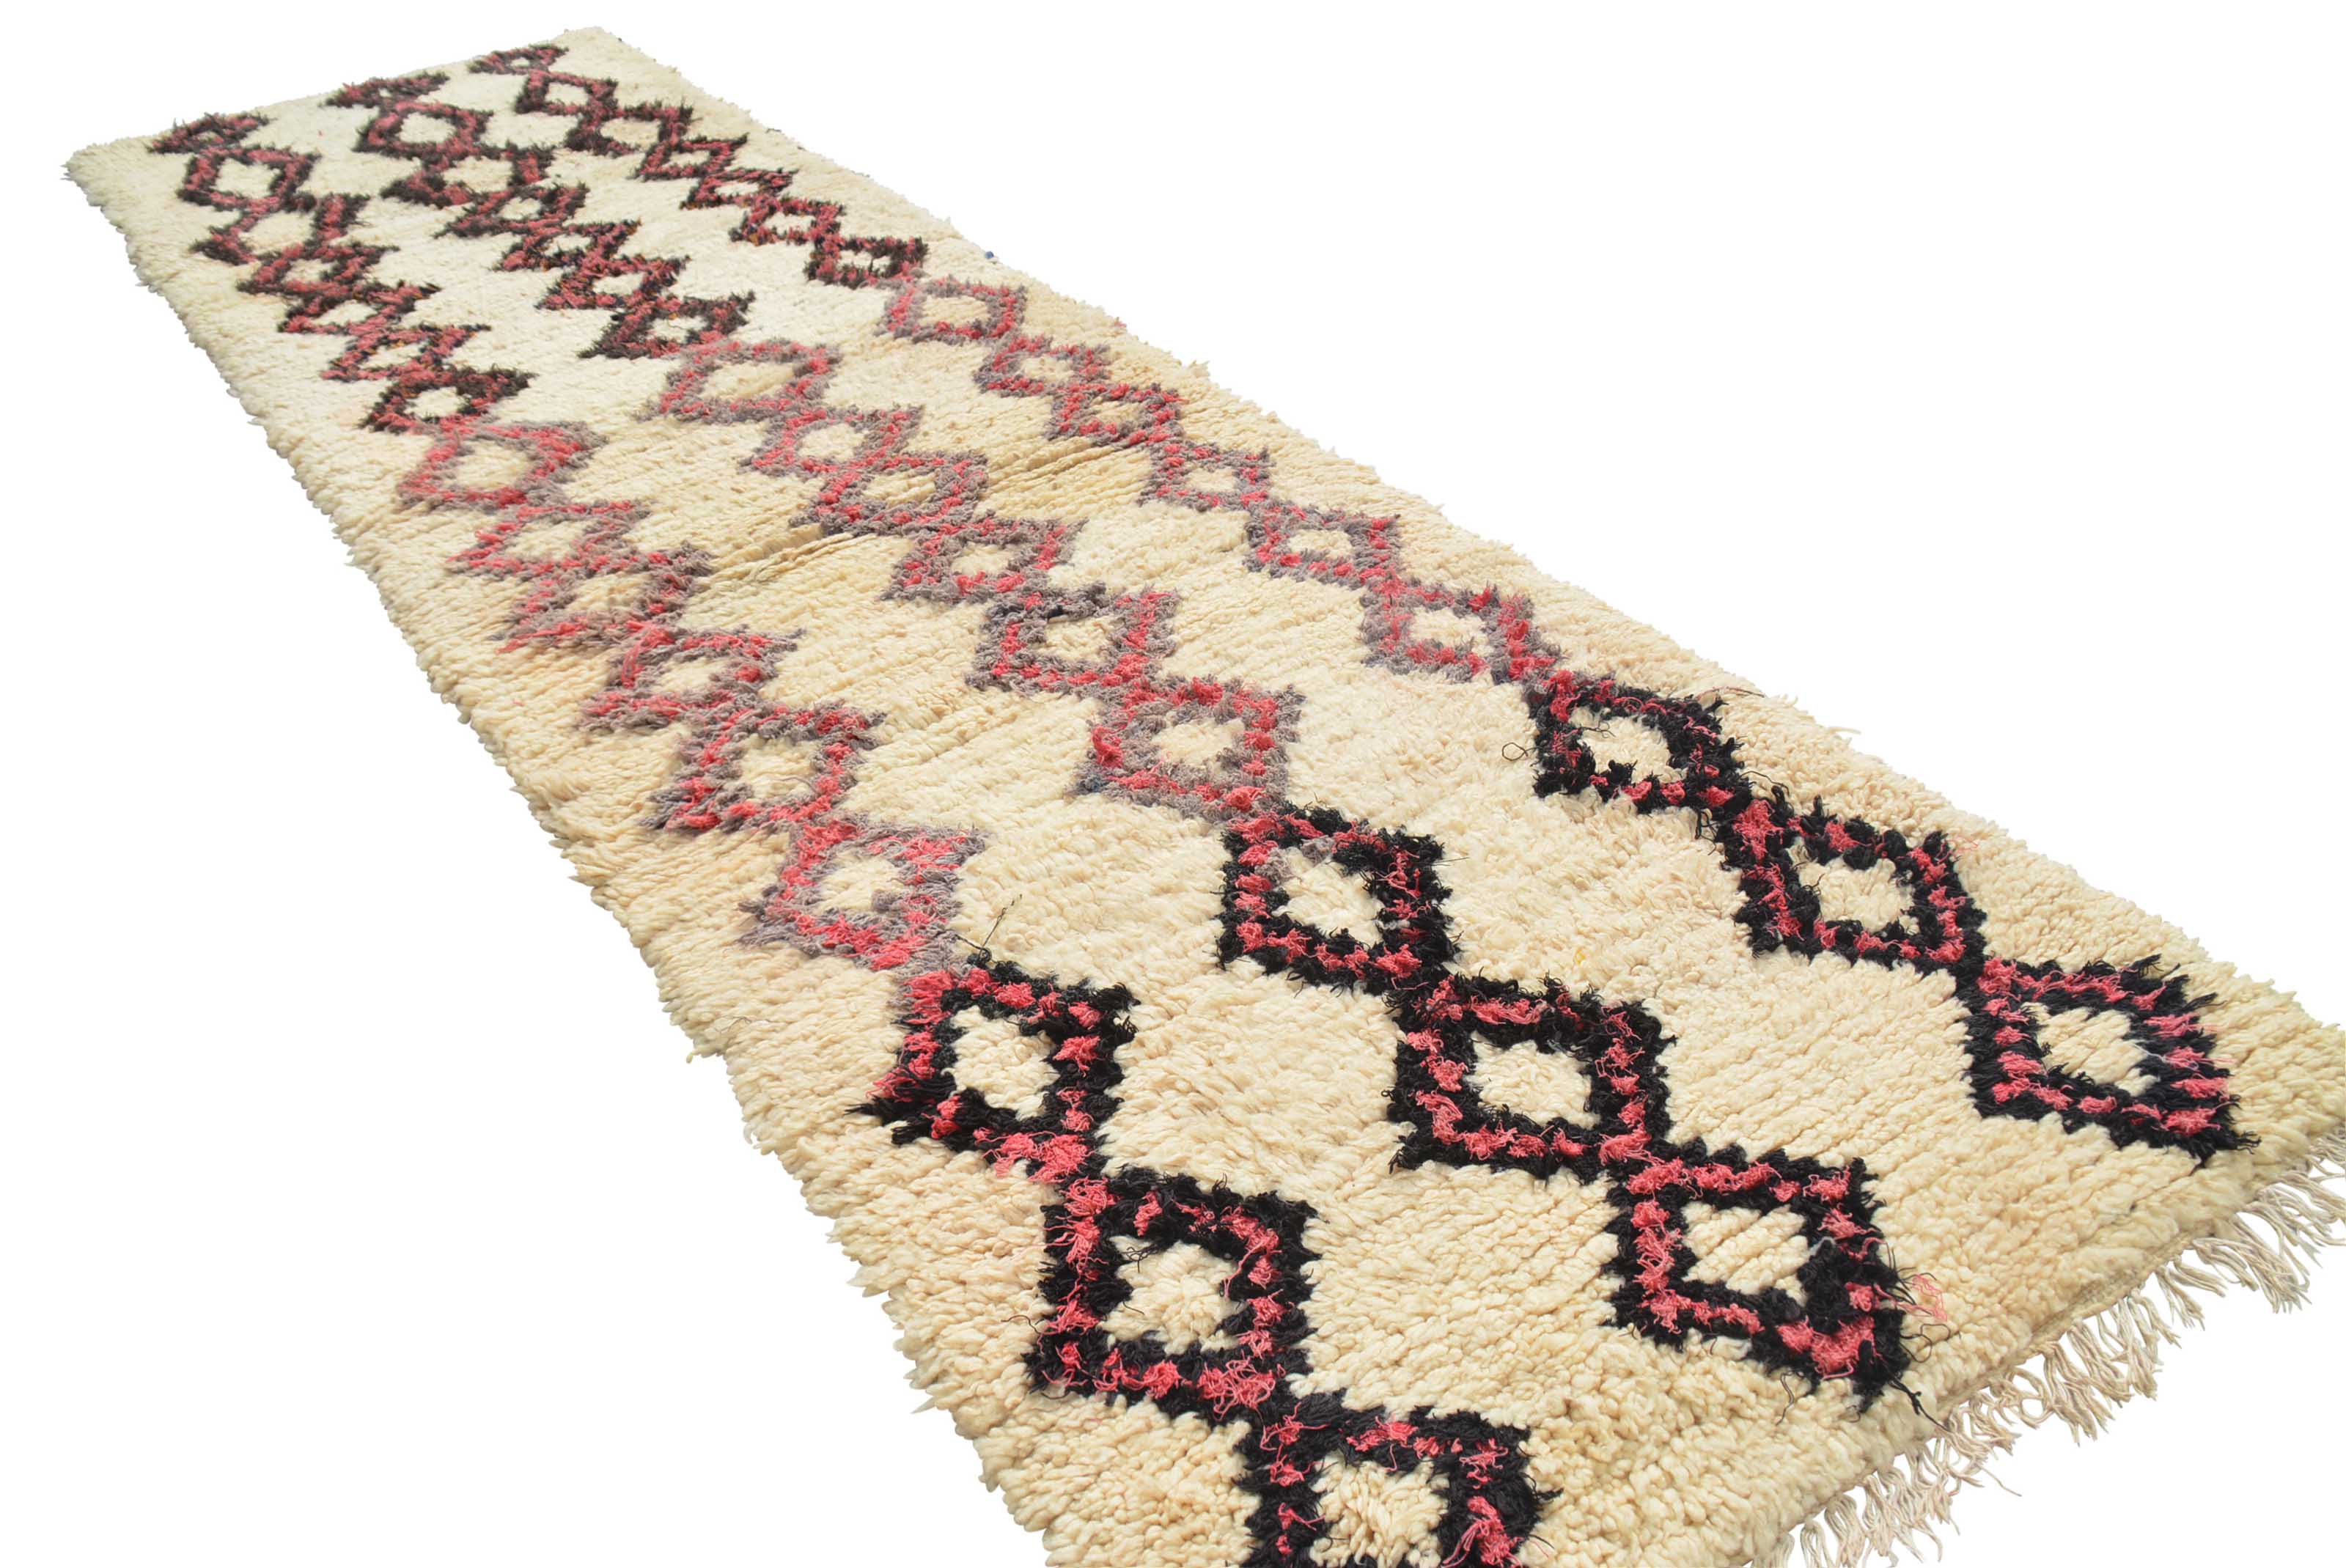 Vintage Moroccan Rug Vintage Runner Rugs | Vintage Looking Rugs | Illuminate Collective illuminate collective 